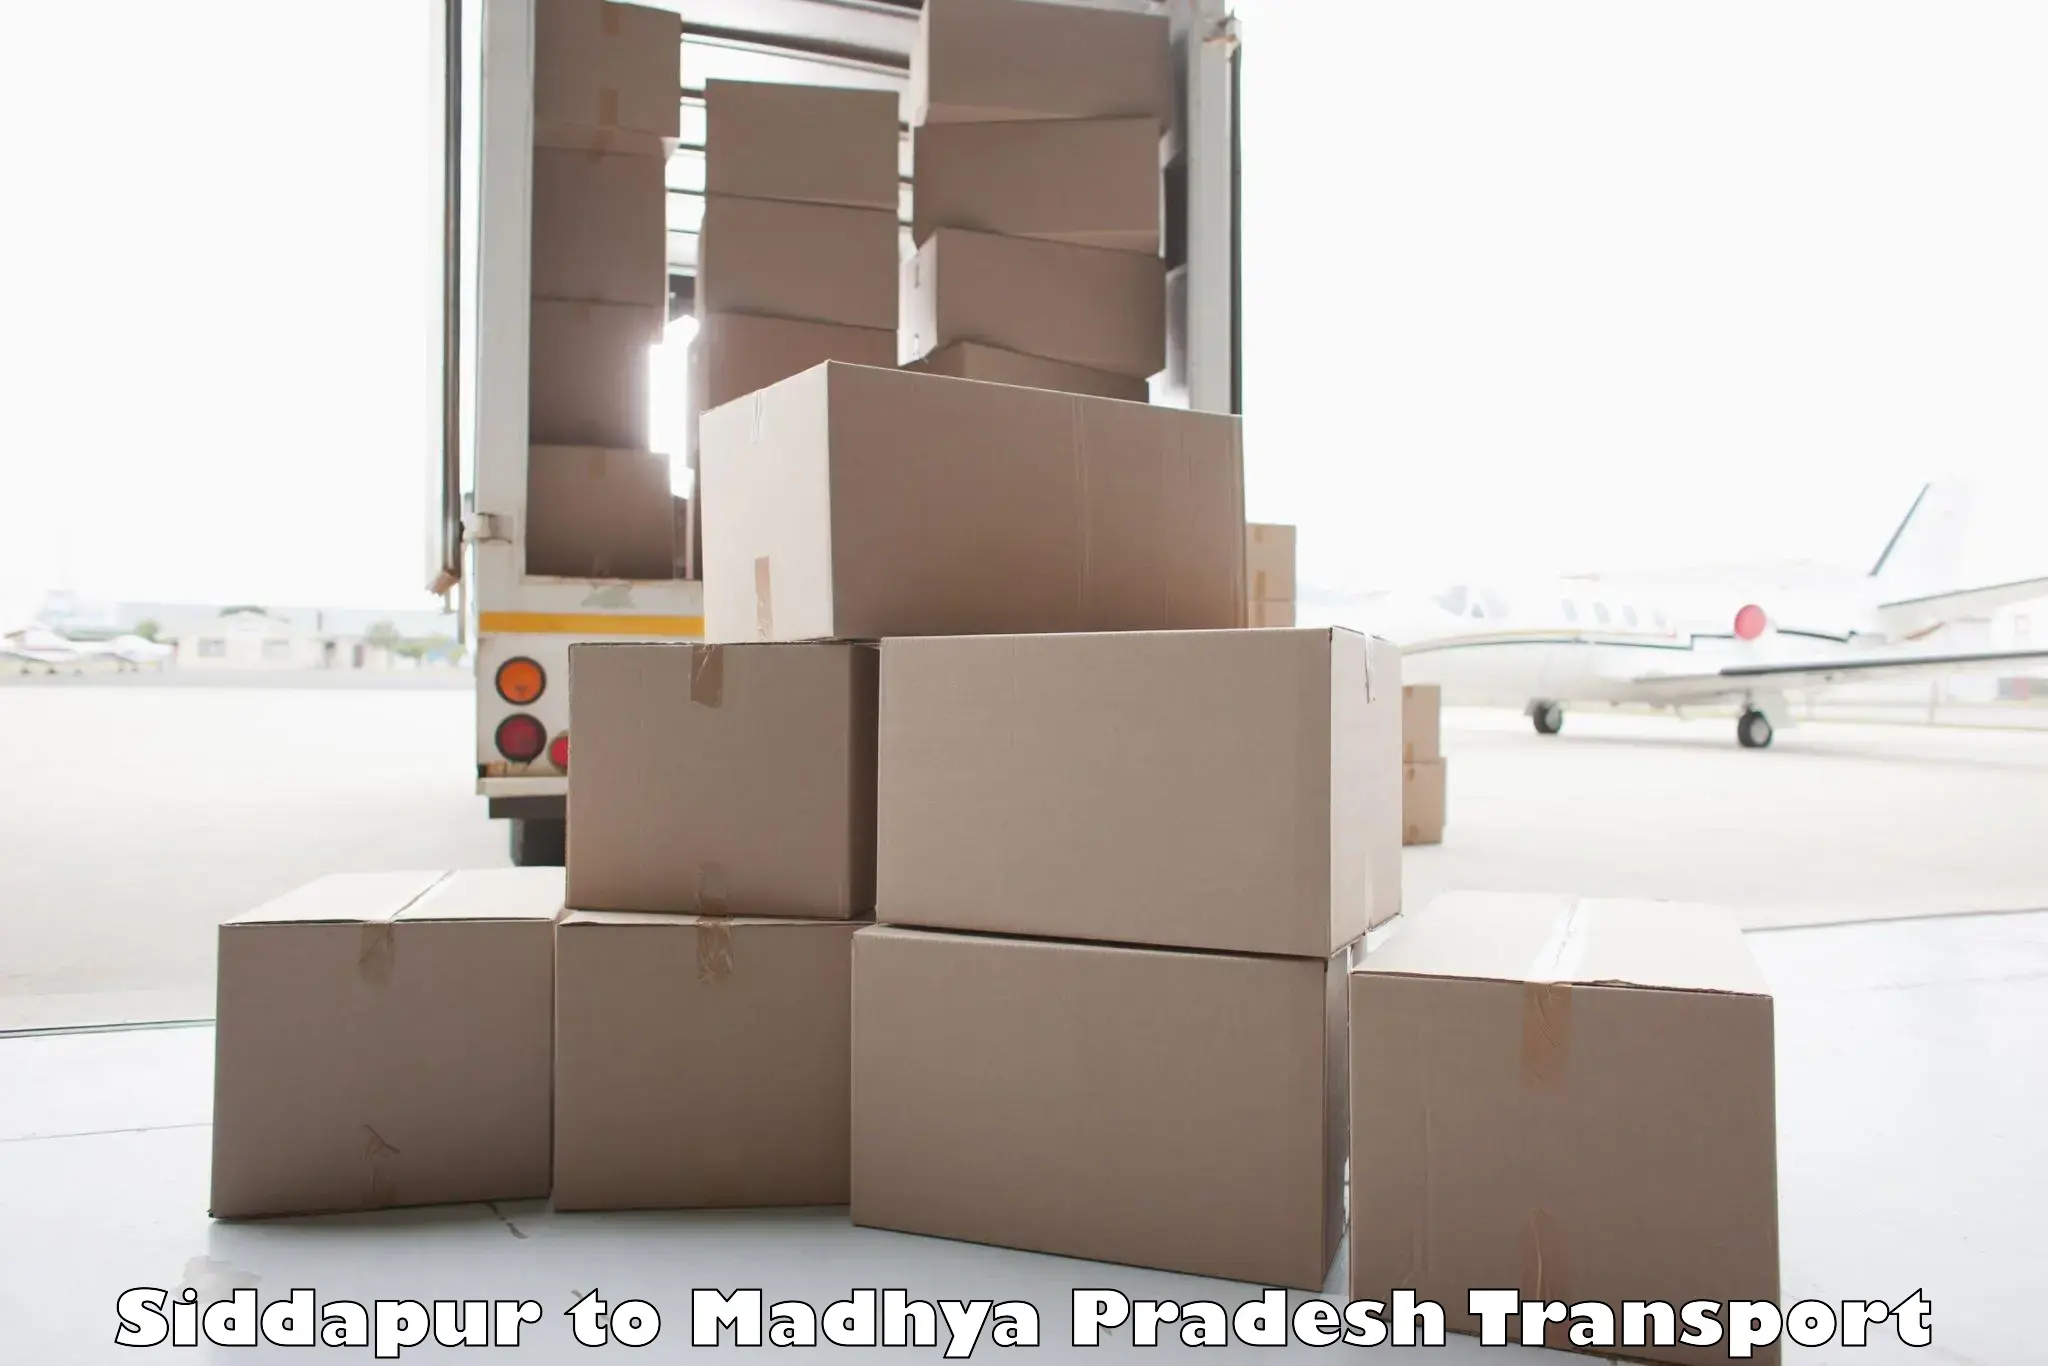 Nearby transport service Siddapur to Indore